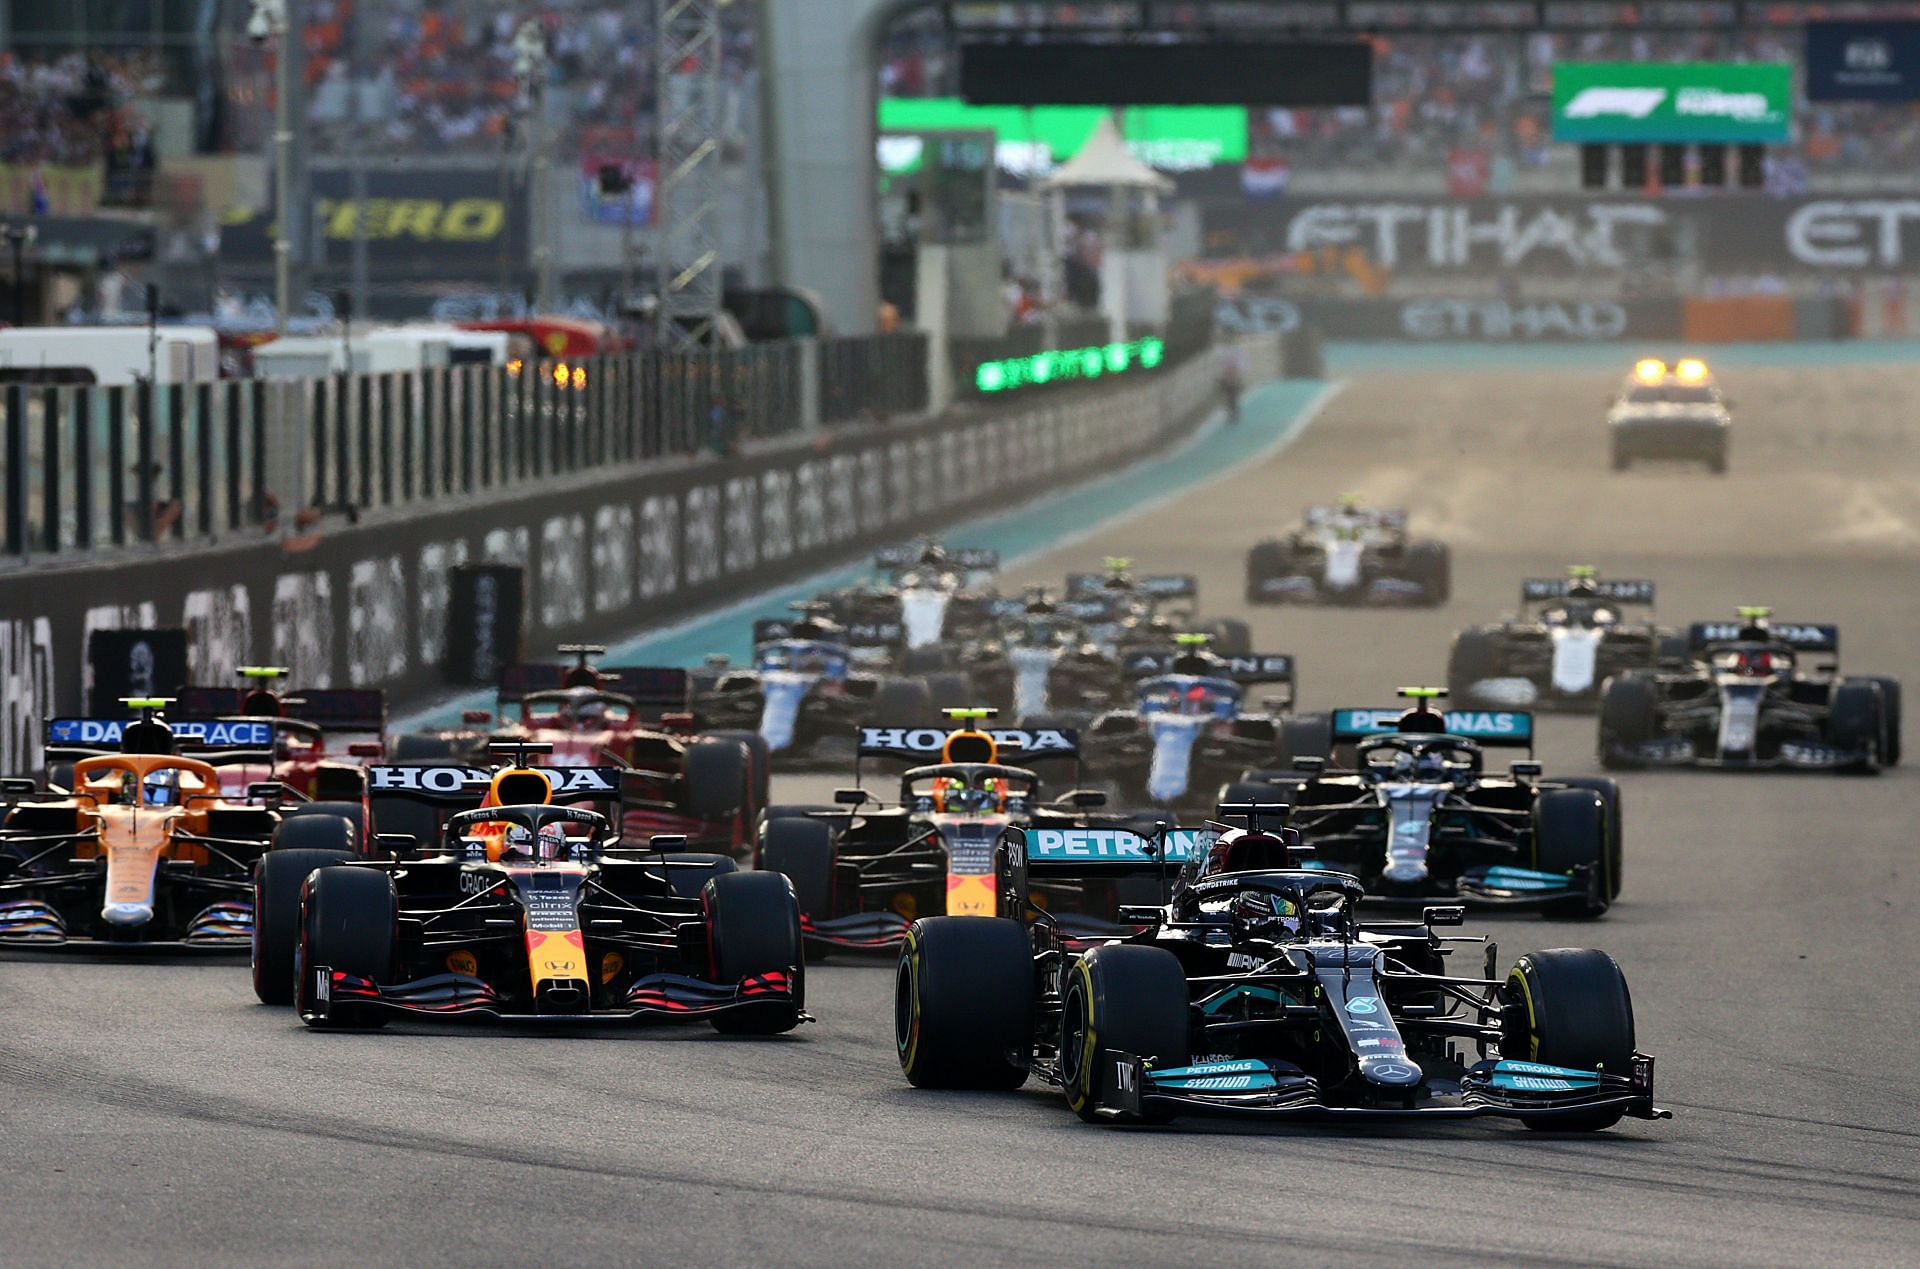 The start of the F1 Grand Prix of Abu Dhabi (Photo by Peter Fox/Getty Images)